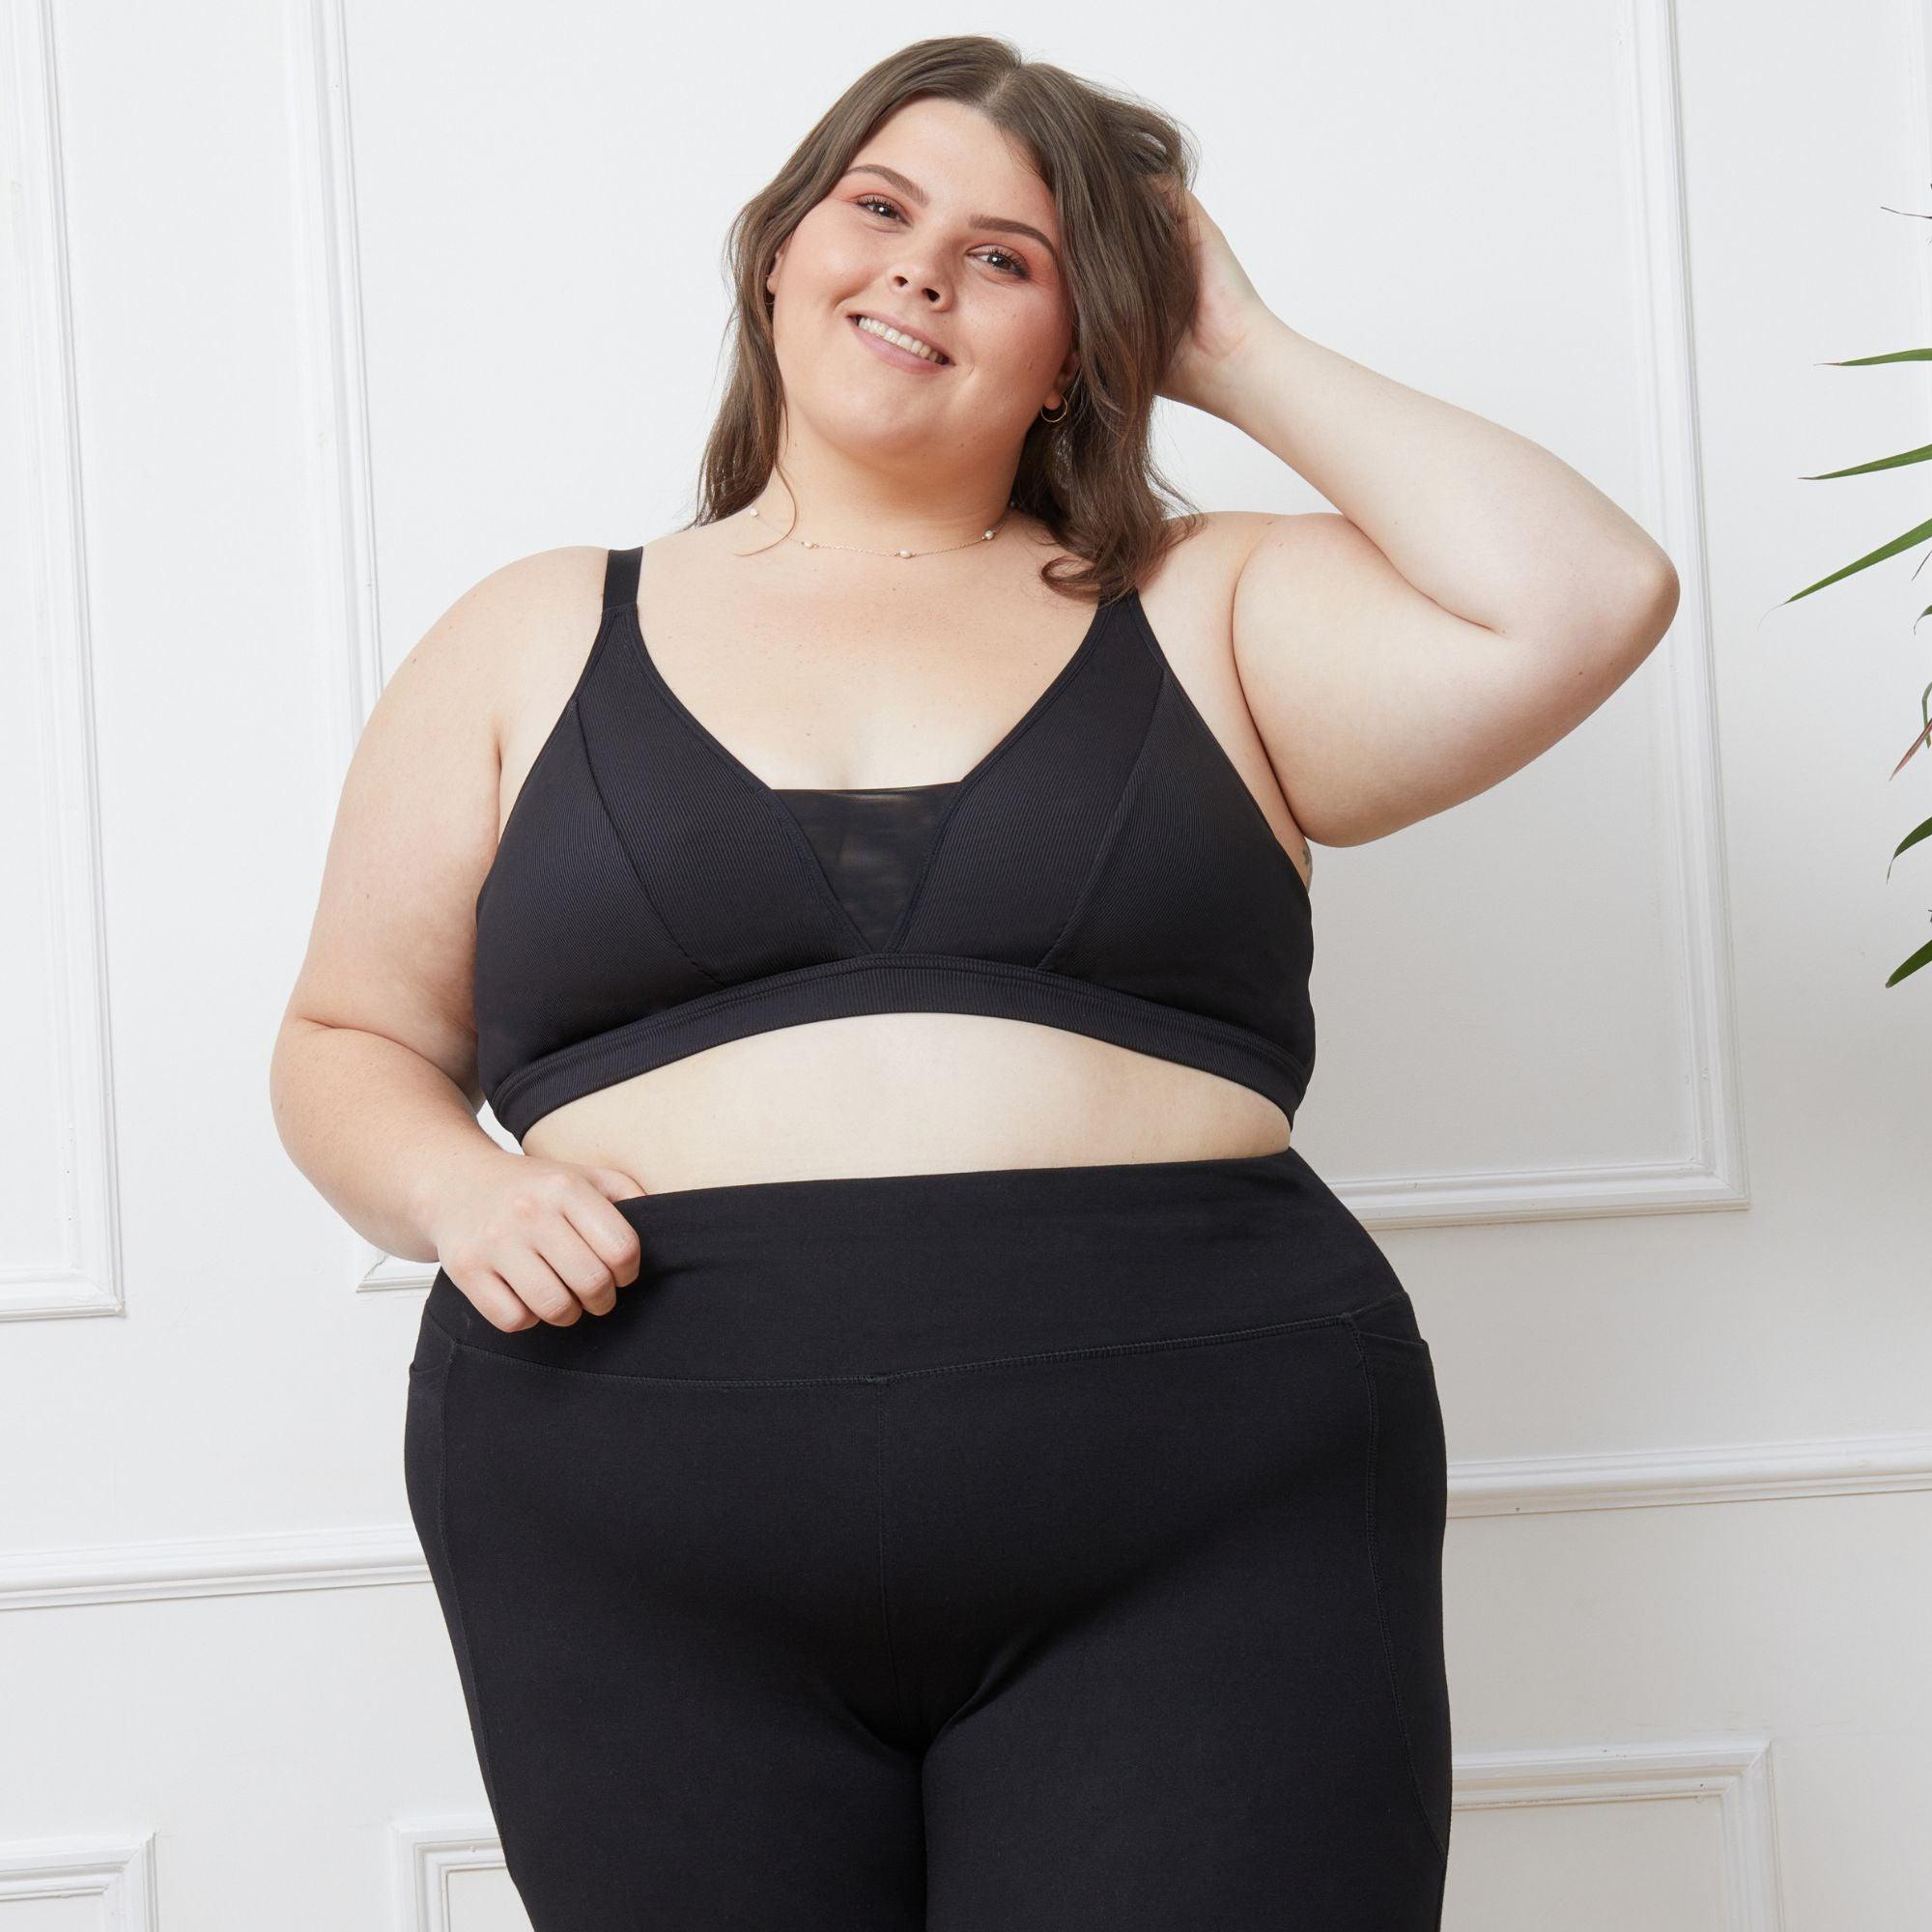 20 best comfortable plus-size bras, bralettes that give support